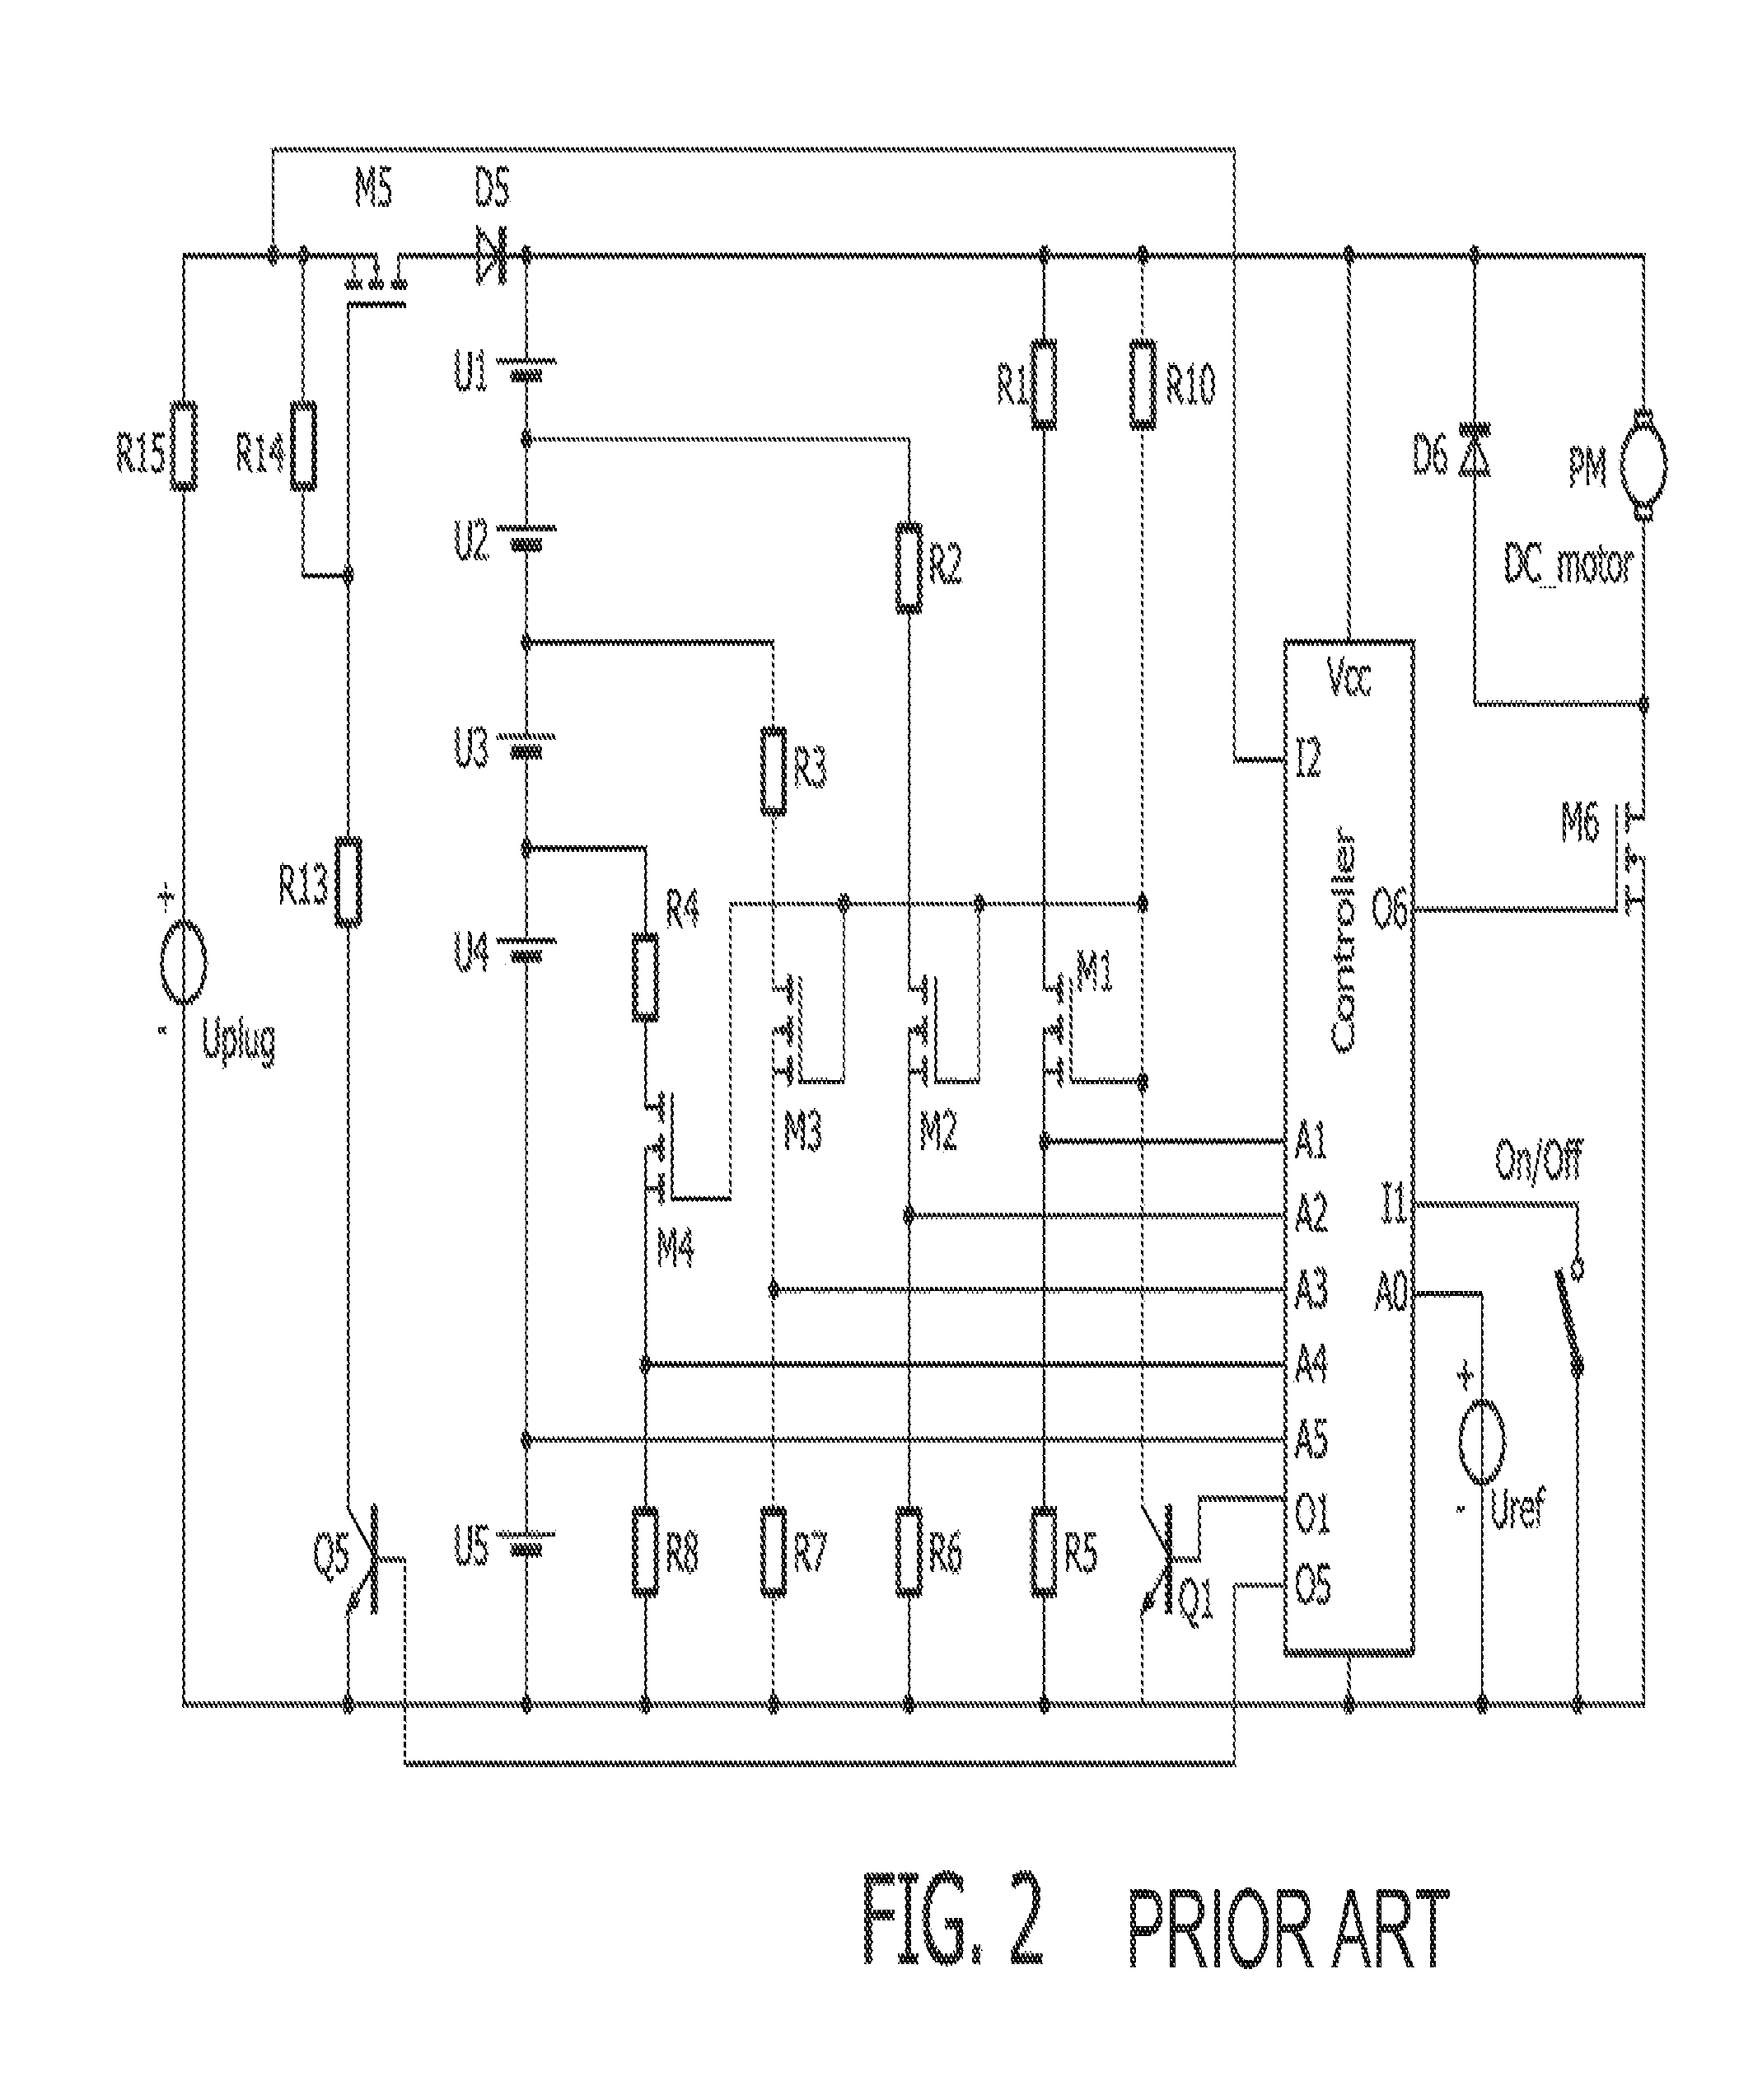 Battery voltage monitoring system for monitoring the battery voltage of a series arrangement of more than two batteries